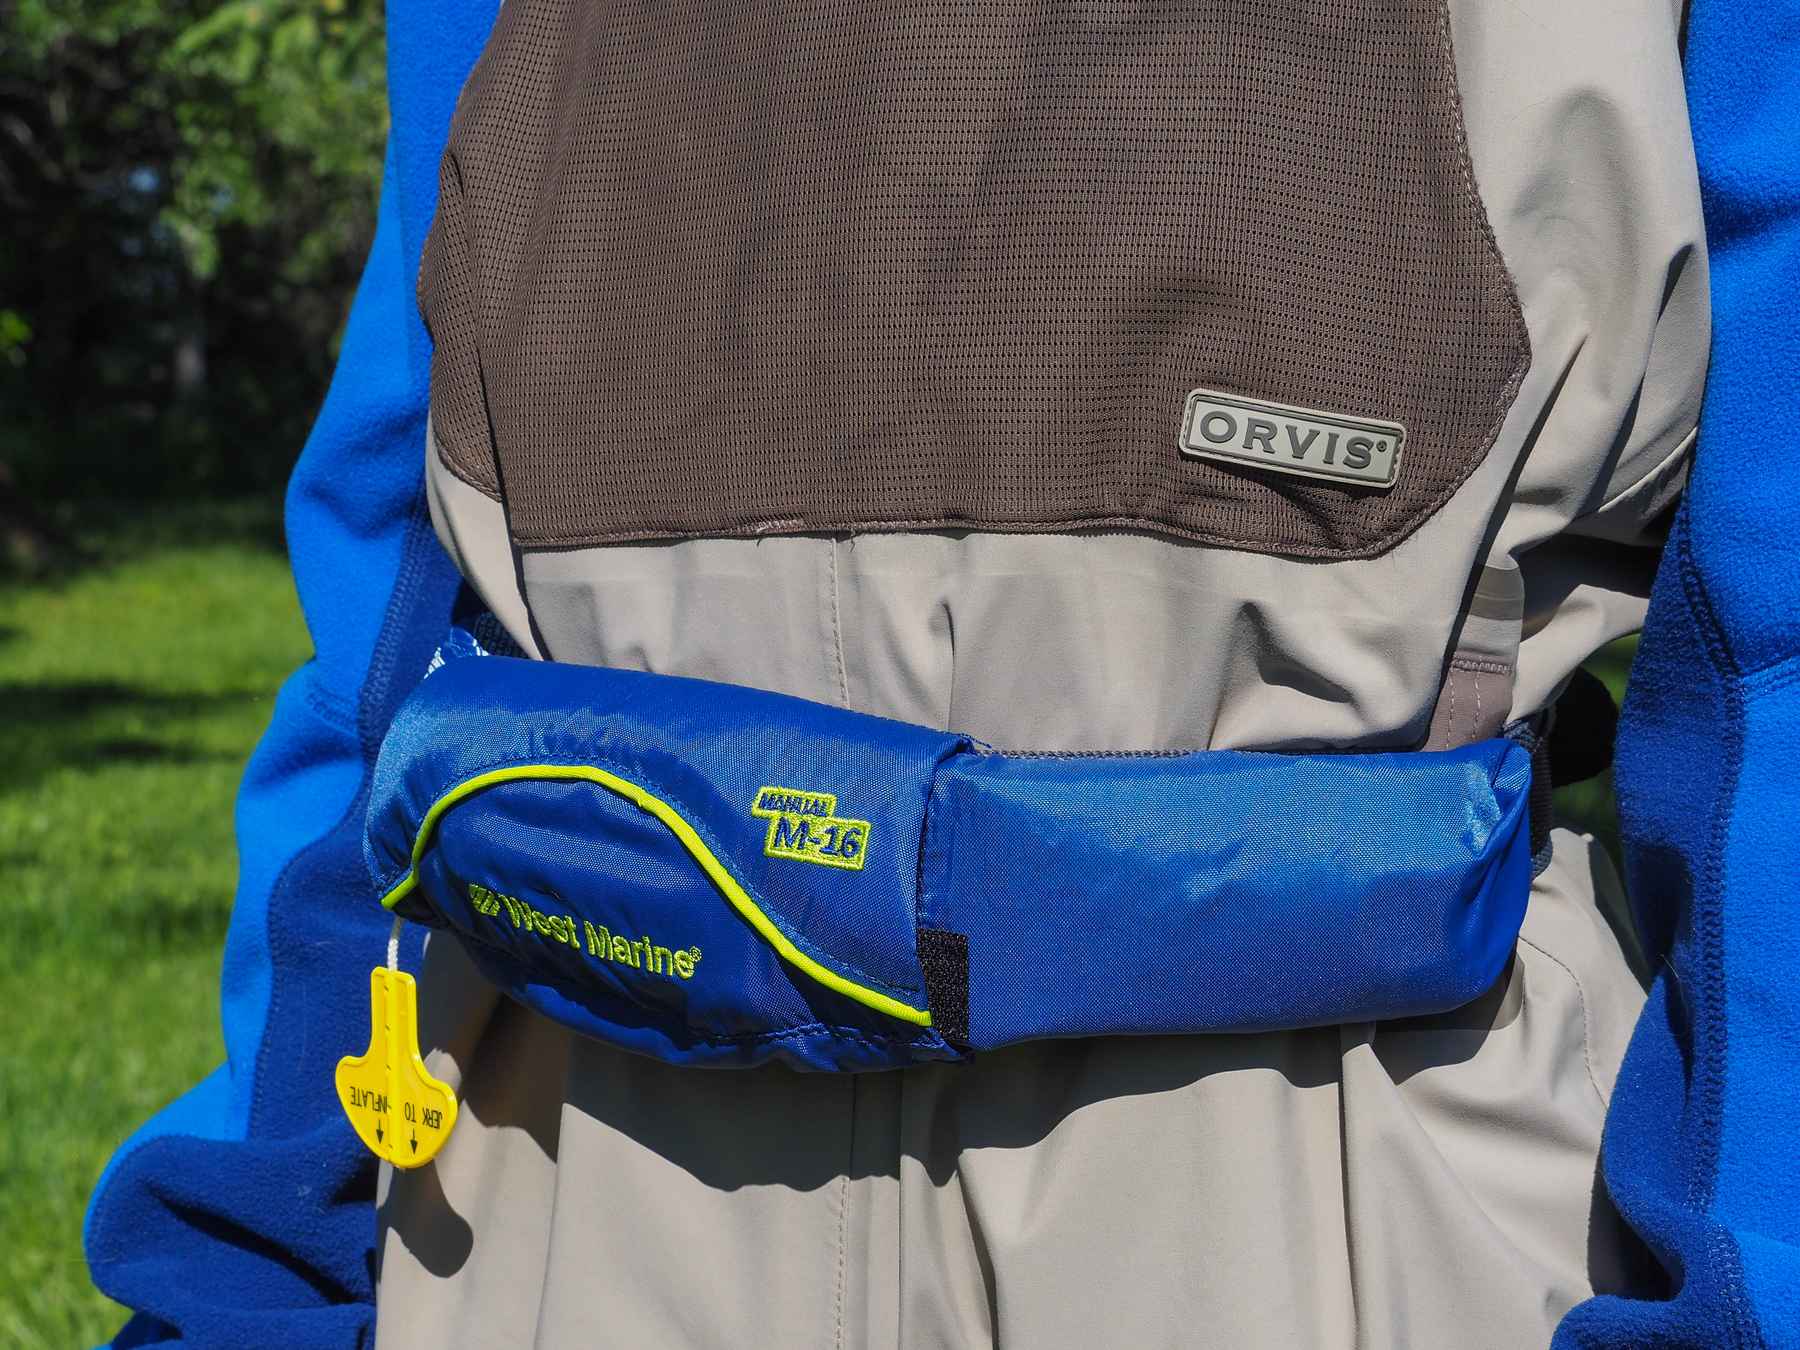 Fishing and PFDs: Life savers — Part 2